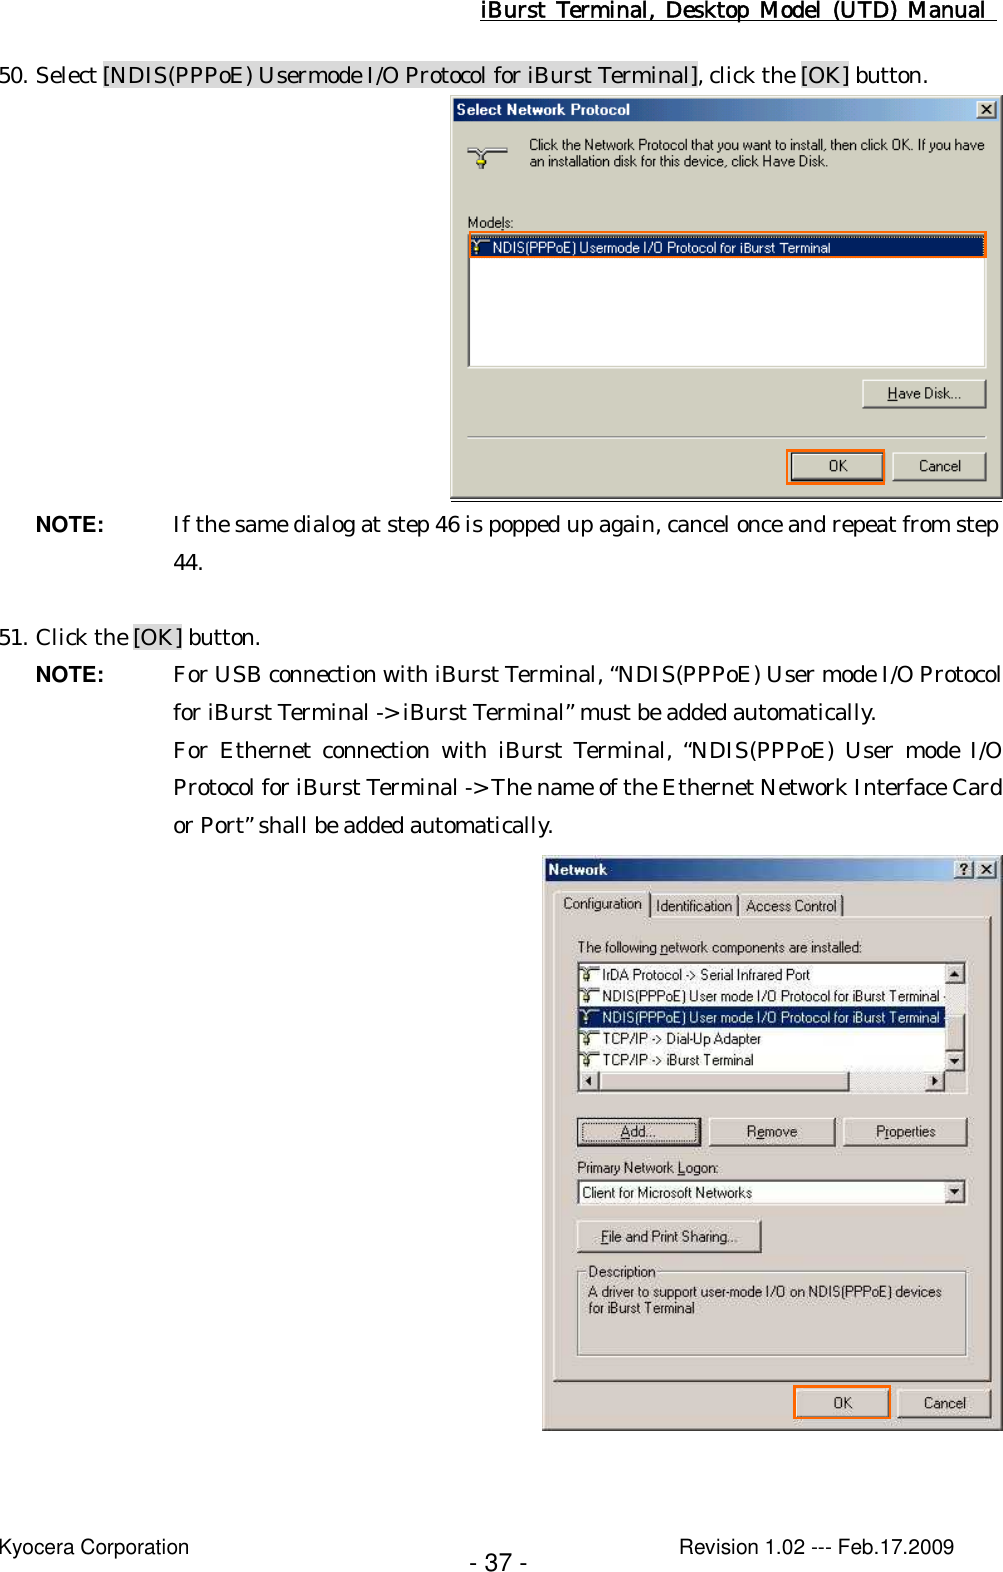 iBurst  Terminal, Desktop  Model  (UTD)  Manual    Kyocera Corporation                                                                                              Revision 1.02 --- Feb.17.2009 - 37 - 50. Select [NDIS(PPPoE) Usermode I/O Protocol for iBurst Terminal], click the [OK] button.  NOTE:  If the same dialog at step 46 is popped up again, cancel once and repeat from step 44.  51. Click the [OK] button. NOTE:  For USB connection with iBurst Terminal, “NDIS(PPPoE) User mode I/O Protocol for iBurst Terminal -&gt; iBurst Terminal” must be added automatically. For  Ethernet  connection with  iBurst  Terminal, “NDIS(PPPoE)  User  mode I/O Protocol for iBurst Terminal -&gt; The name of the Ethernet Network Interface Card or Port” shall be added automatically.   